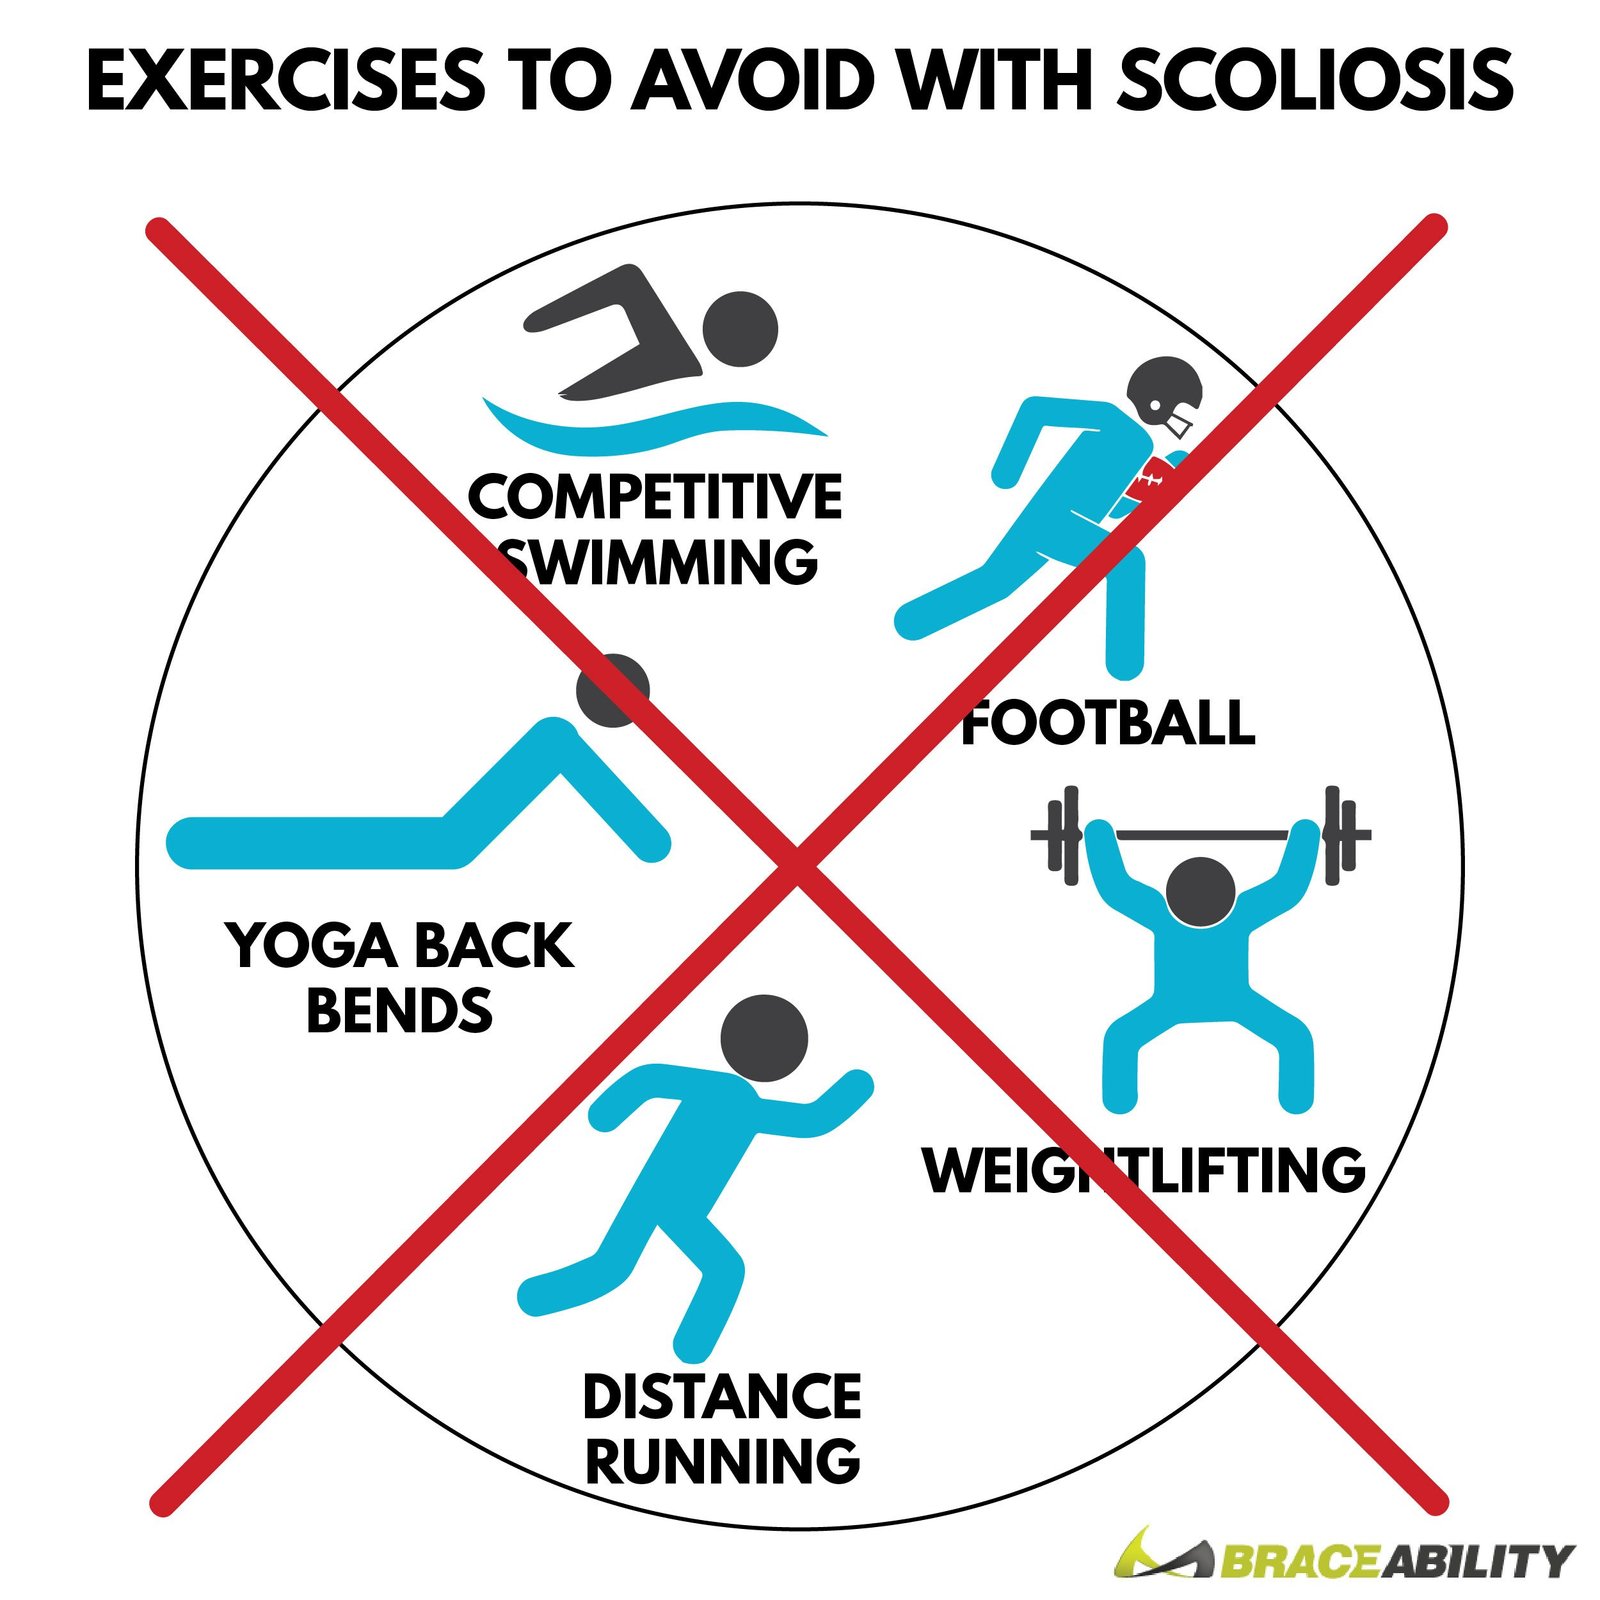 Exercises to avoid with Scoliosis